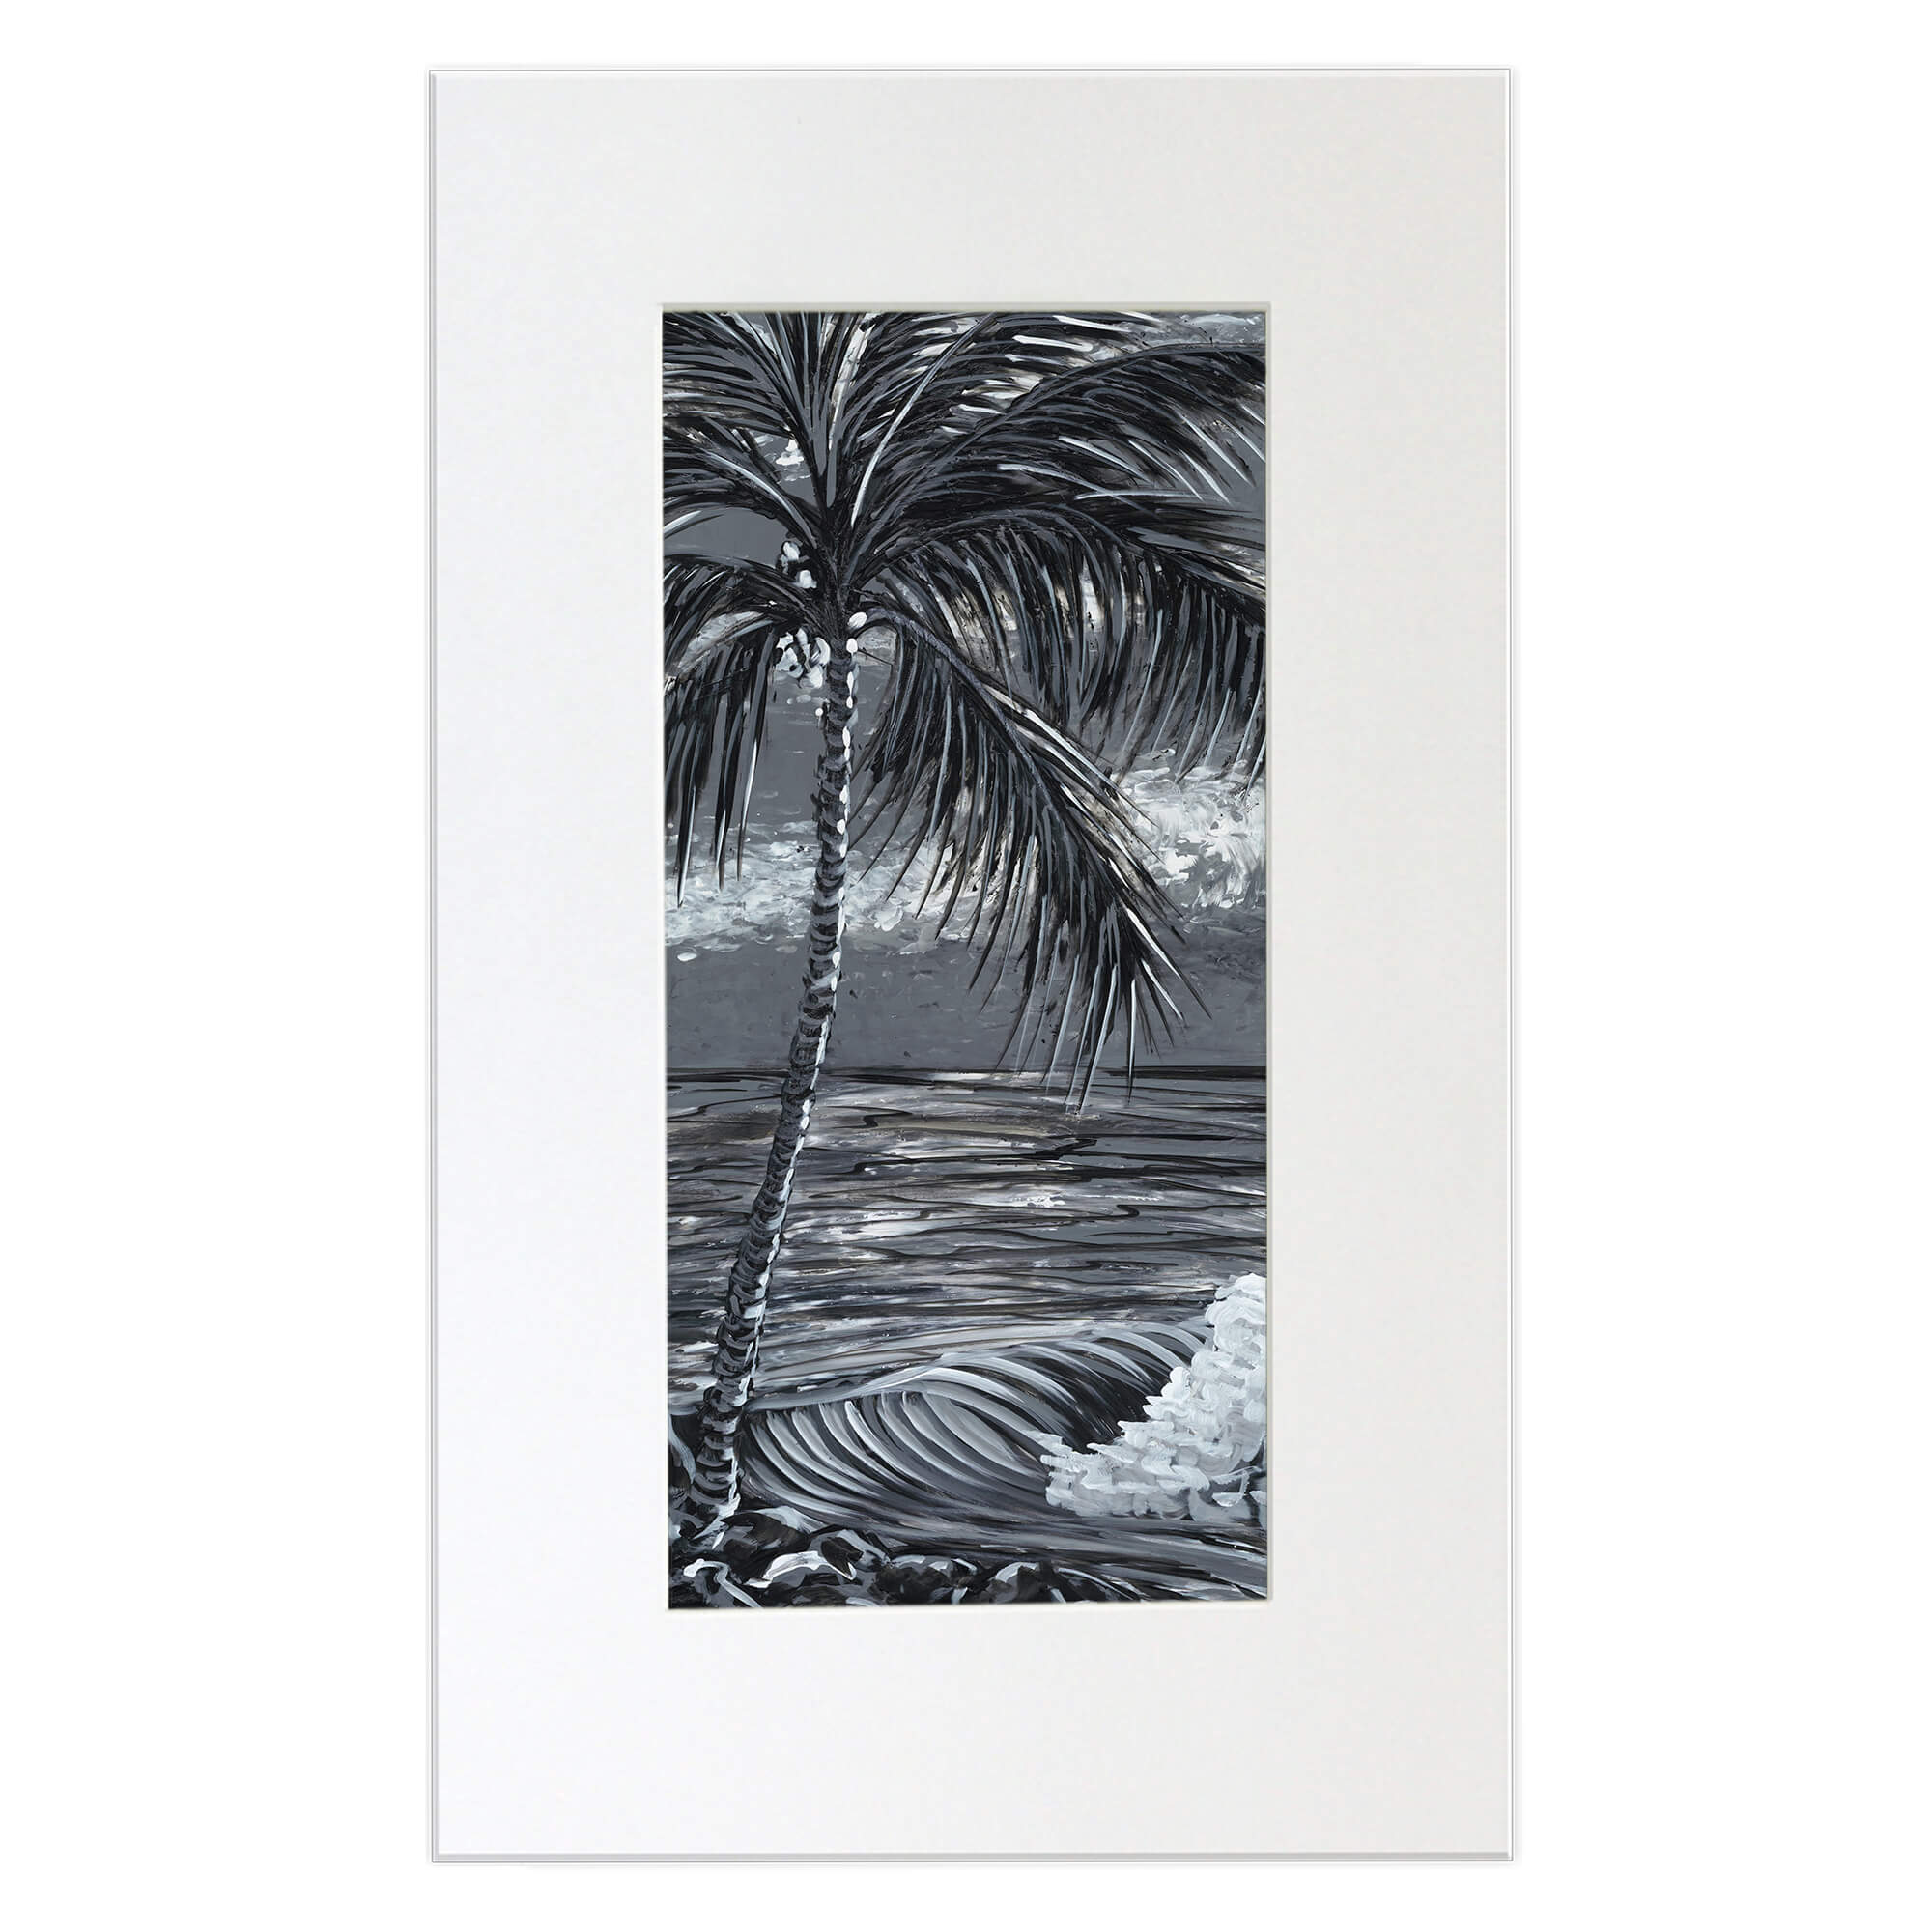 Matted art print featuring a tall palm tree by hawaii artist Suzanne MacAdam